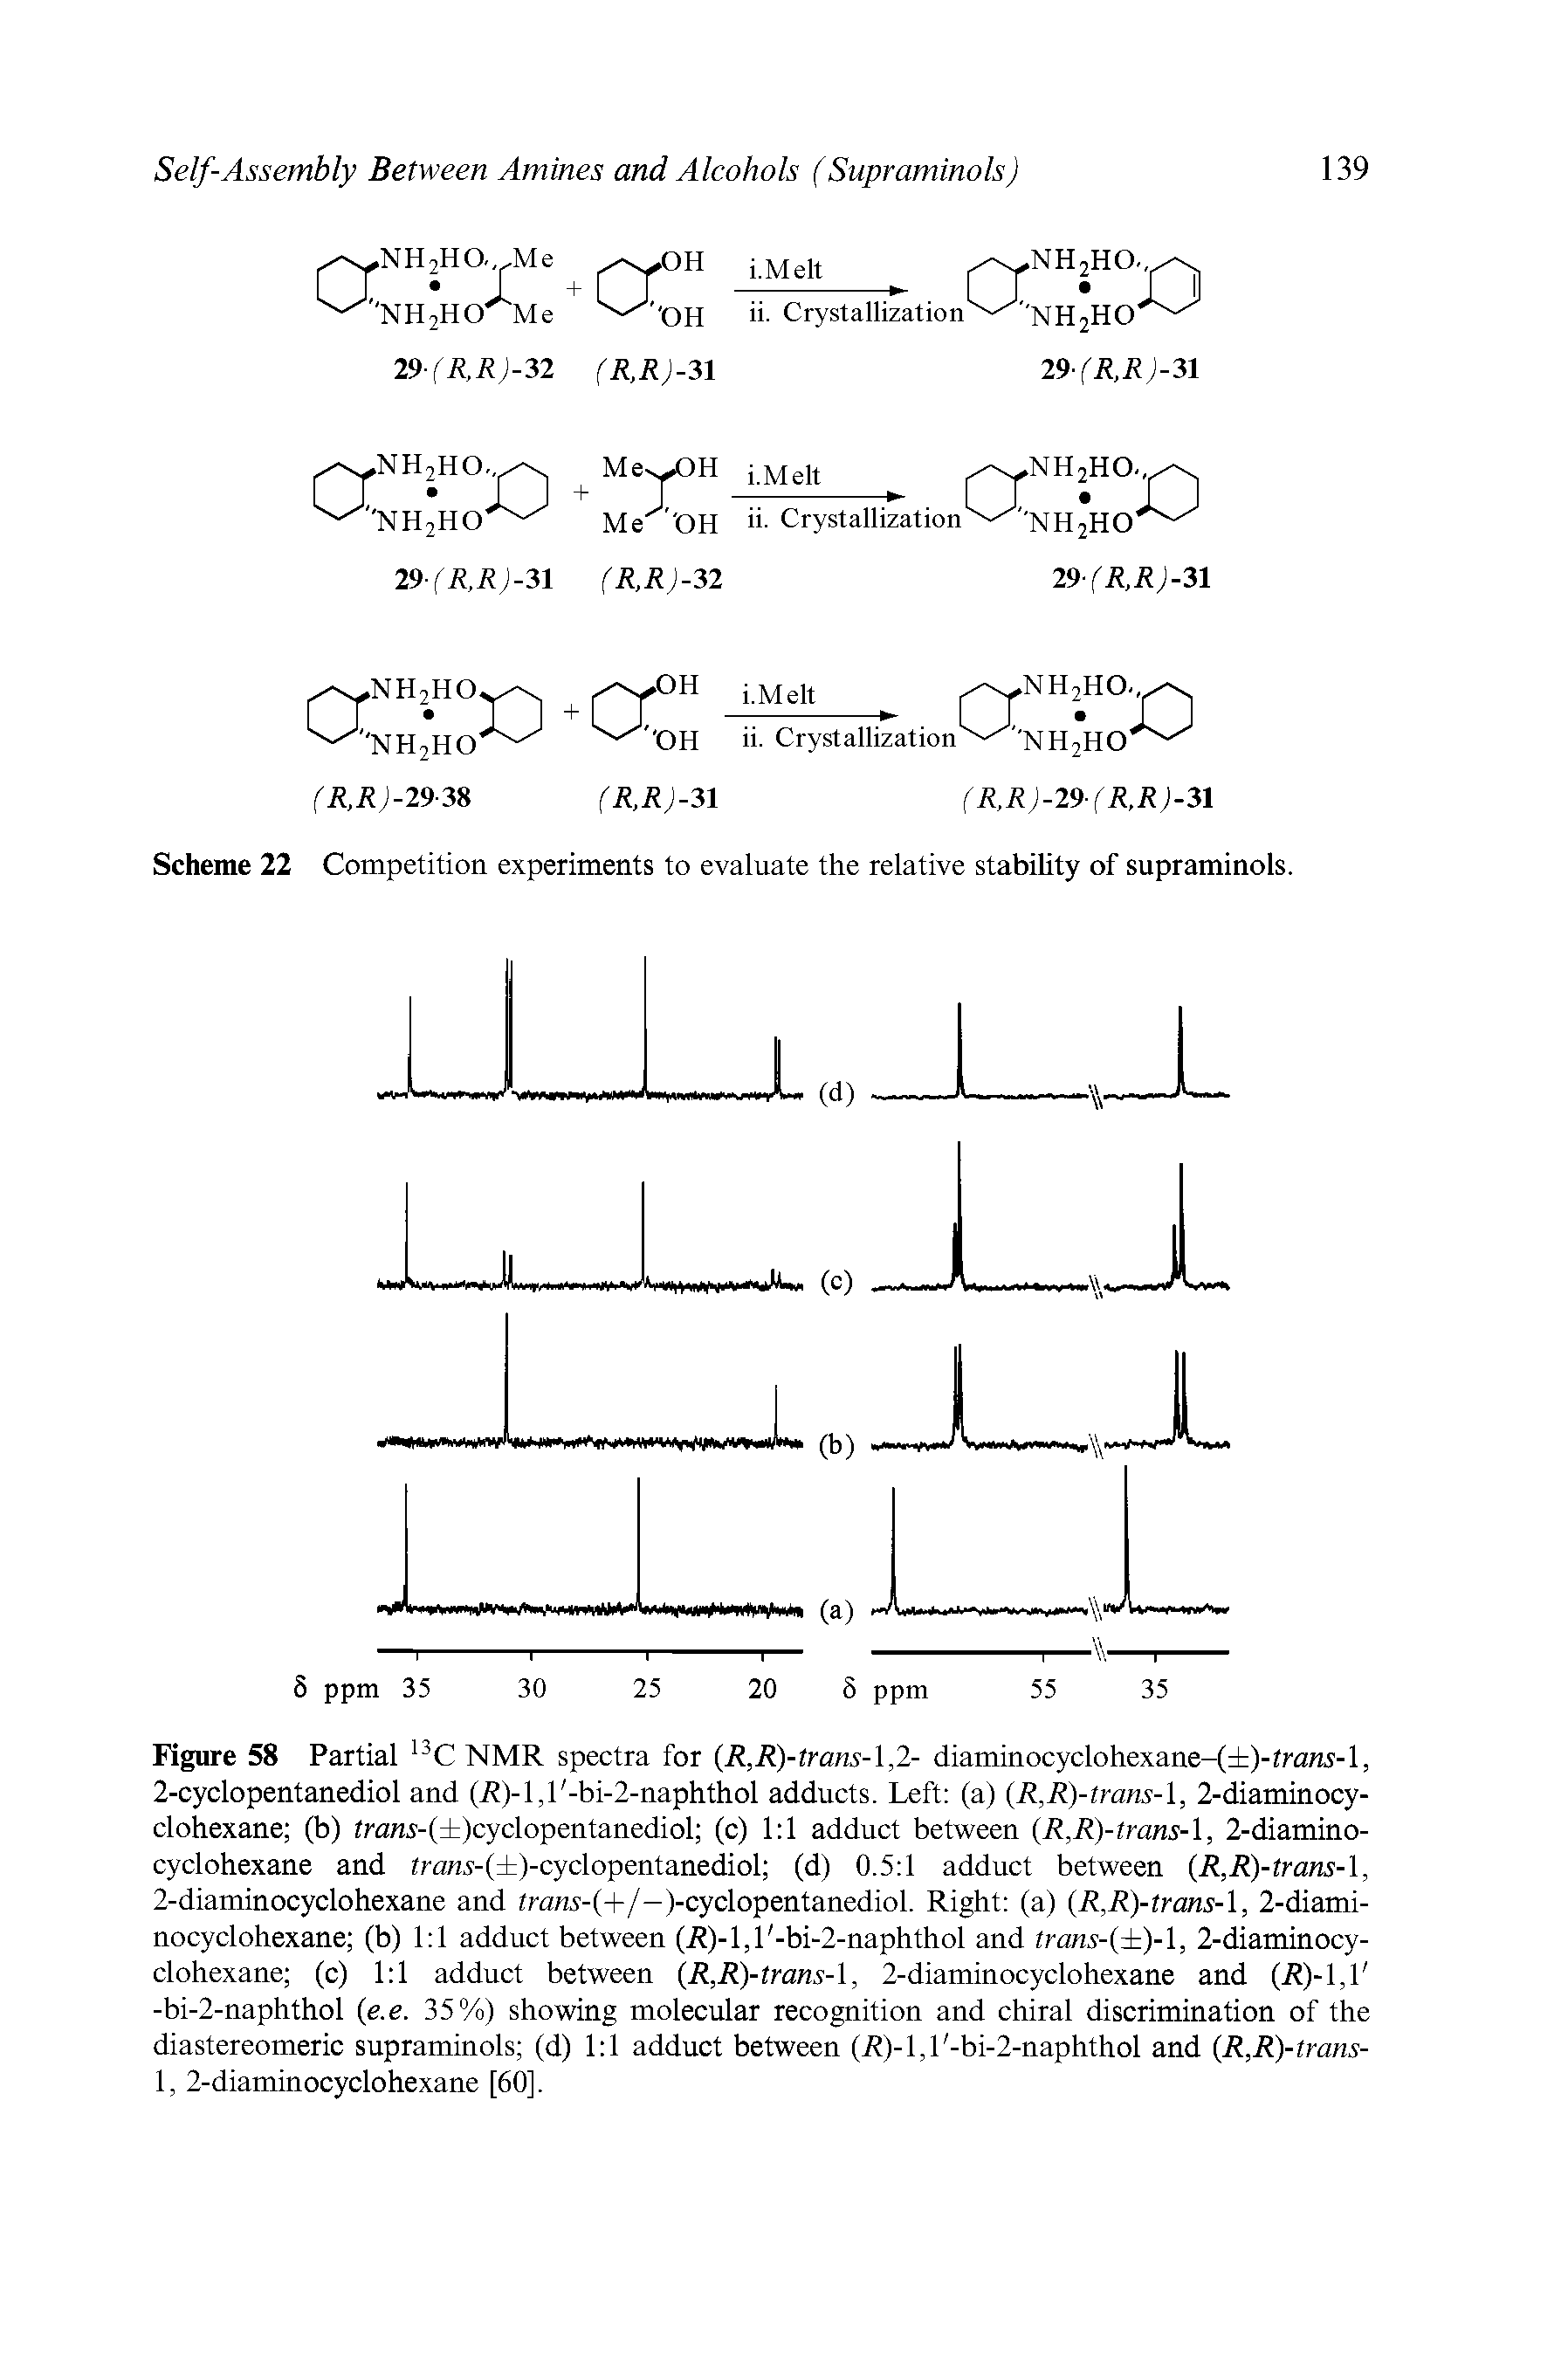 Figure 58 Partial 13C NMR spectra for (R,R)-trans-1,2- diaminocyclohexane-( )-irani-l, 2-cyclopentanediol and (R)-l,l -bi-2-naphthol adducts. Left (a) (R,R)-trans-1, 2-diaminocy-clohexane (b) inms-( )cyclopentanediol (c) 1 1 adduct between (R,R)-trans-1, 2-diamino-cyclohexane and tranx-( )-cyclopentanediol (d) 0.5 1 adduct between (R,R)-trans-1, 2-diaminocyclohexane and Znms-(+/-)-cyclopentanediol. Right (a) (R,R)-trans-1, 2-diami-nocyclohexane (b) 1 1 adduct between (i )-l,l -bi-2-naphthol and trans-( )-1, 2-diaminocyclohexane (c) 1 1 adduct between R,R)-trans-1, 2-diaminocyclohexane and (2 )-1,1 -bi-2-naphthol (e.e. 35%) showing molecular recognition and chiral discrimination of the diastereomeric supraminols (d) 1 1 adduct between (R)-l,l -bi-2-naphthol and (R,R)-trans-1, 2-diaminocyclohexane [60],...